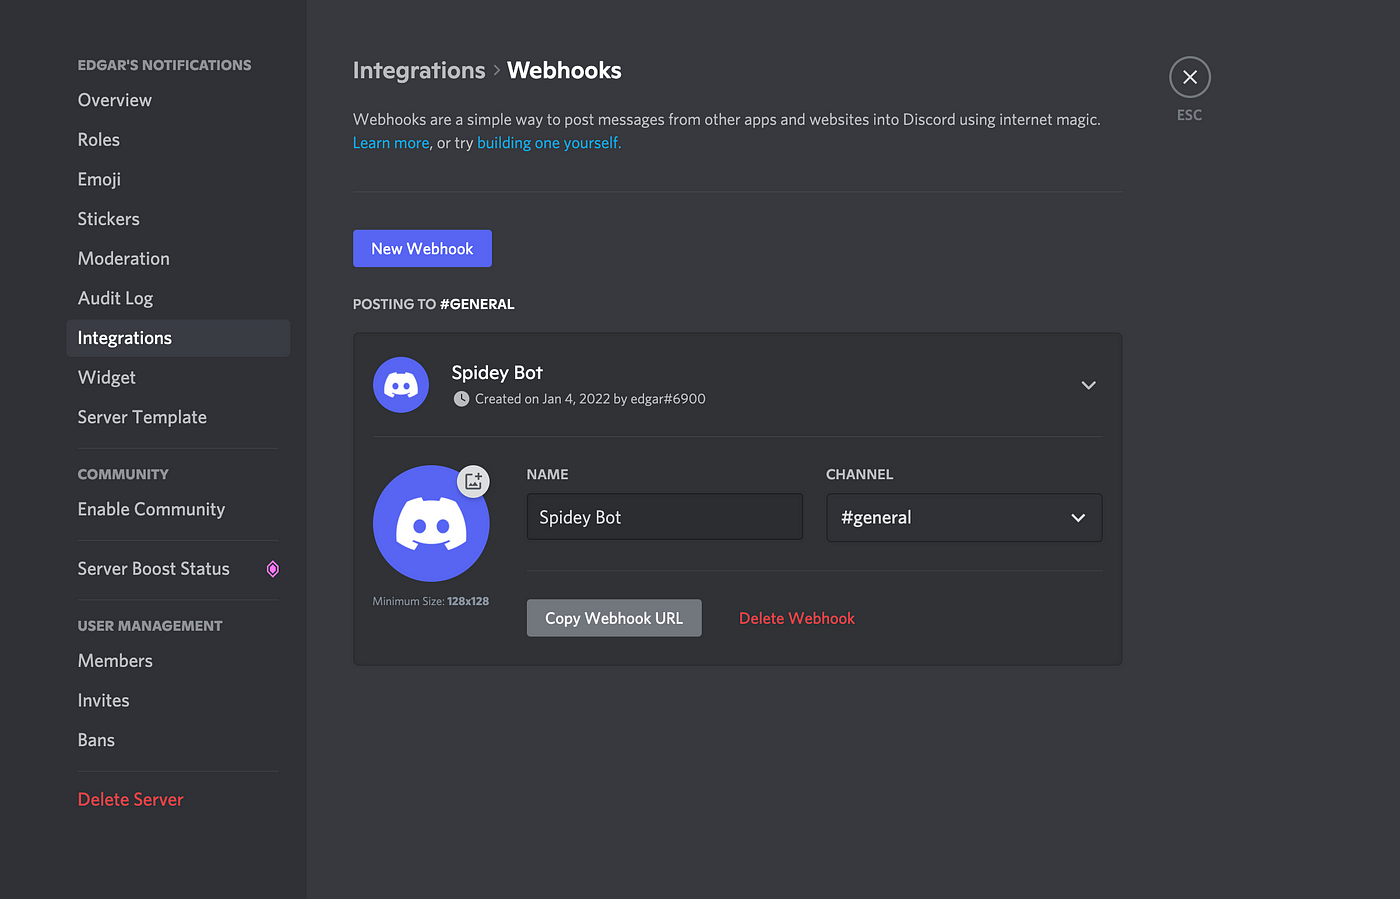 Enabling health notifications on Discord for your Chia Farm in